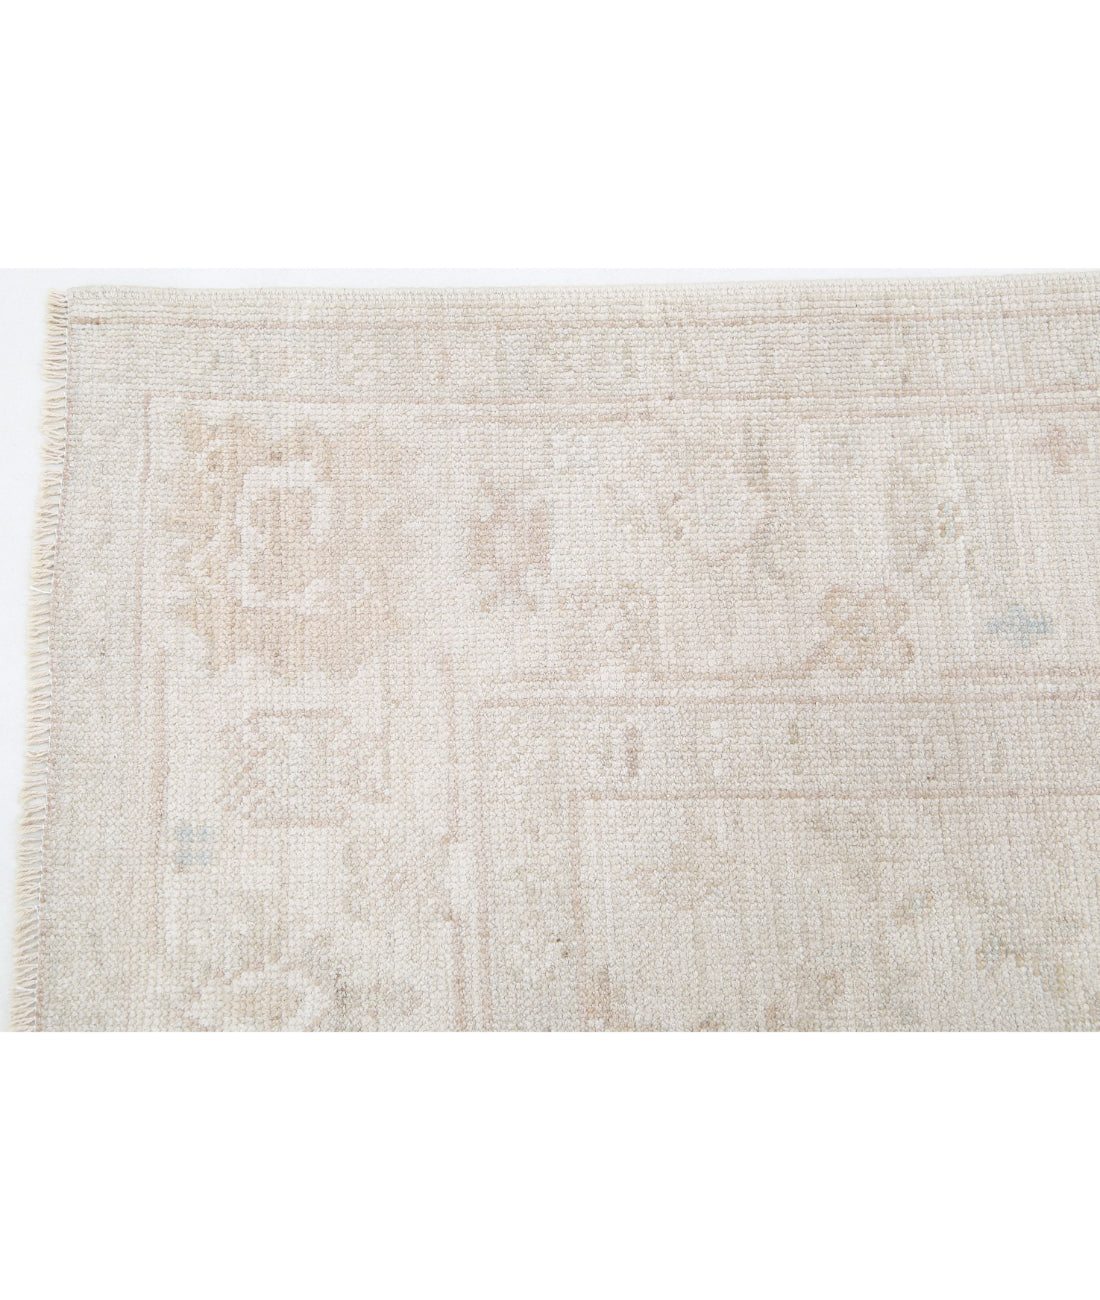 hand-knotted-oushak-wool-rug-5013316-6.jpg